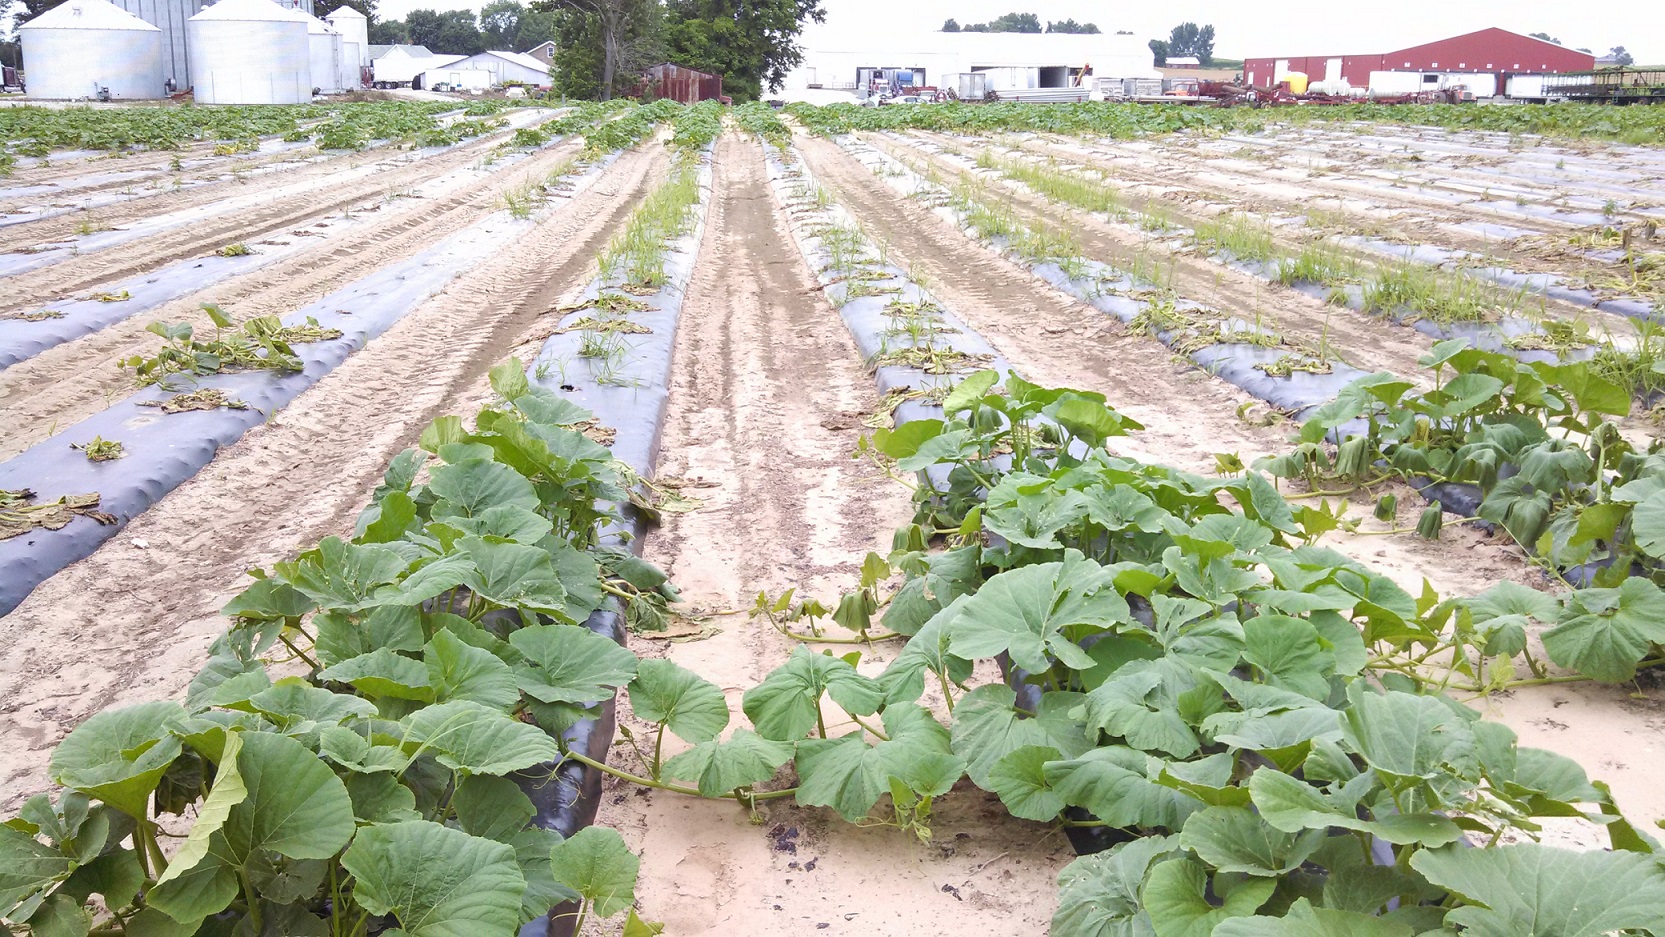 Figure 10. Phytophthora blight has affected the pumpkin plants in the lower area of this field.